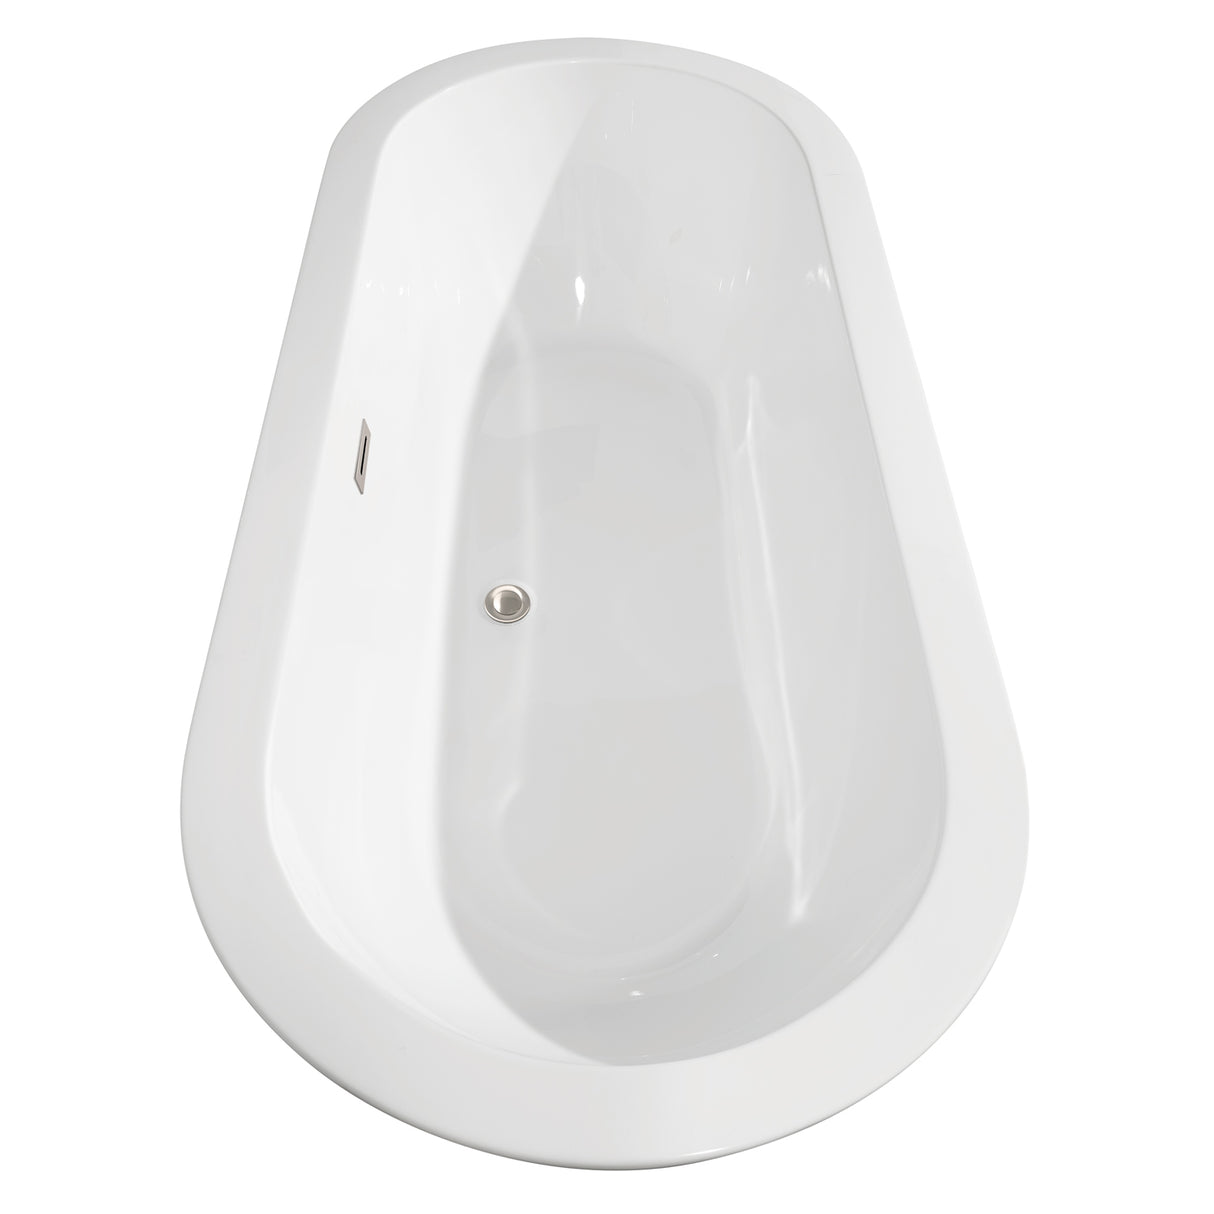 Soho 68 Inch Freestanding Bathtub in White with Floor Mounted Faucet Drain and Overflow Trim in Brushed Nickel